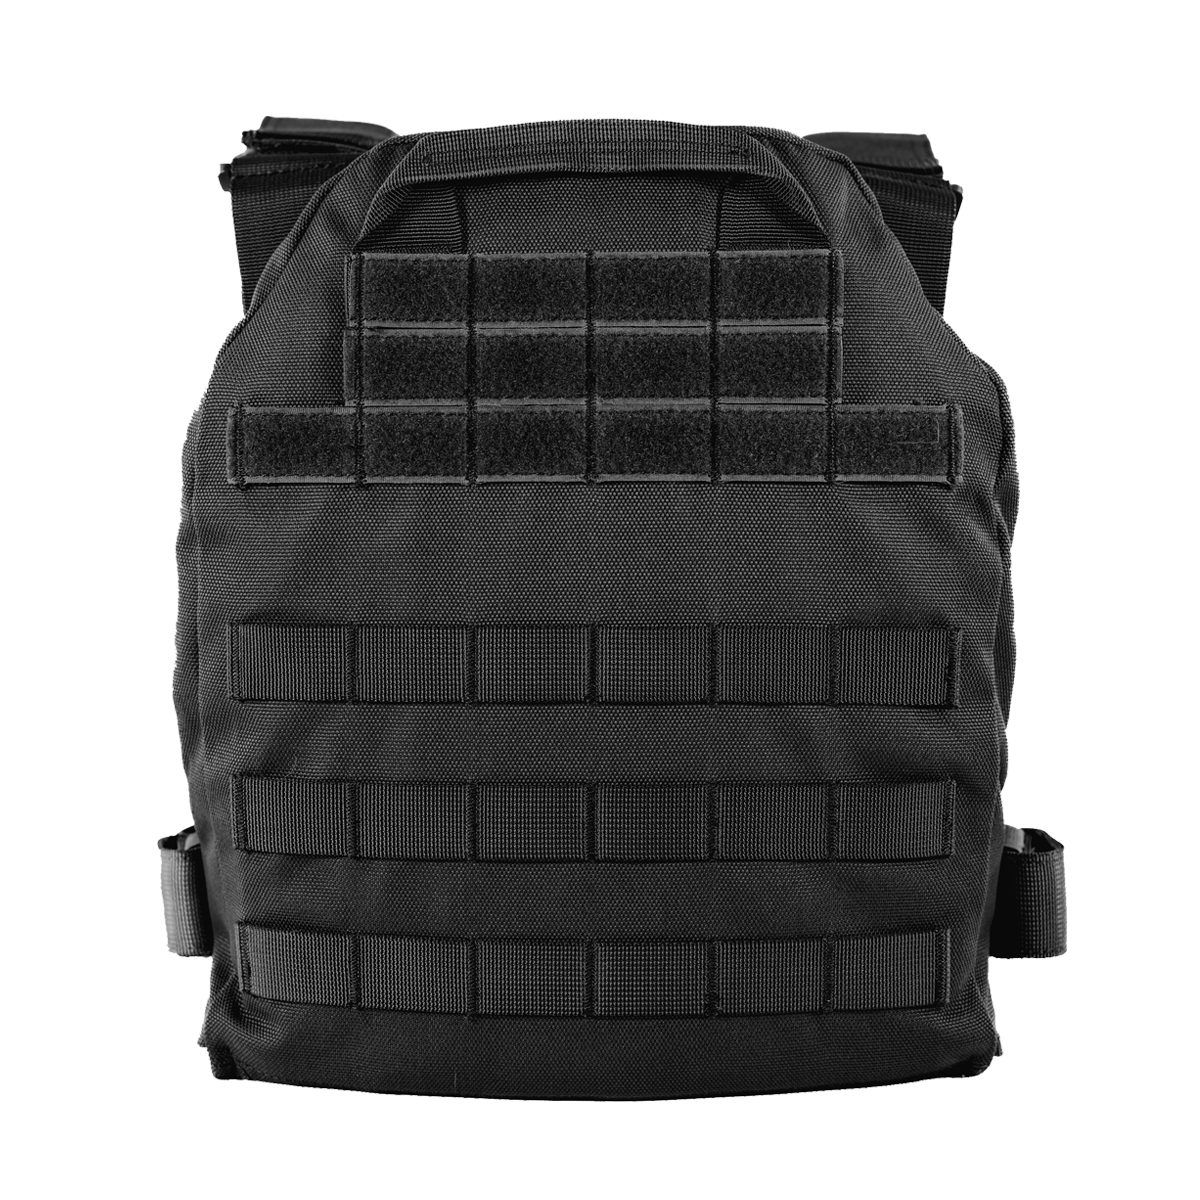 Mule Carry Bag by 0331 Tactical